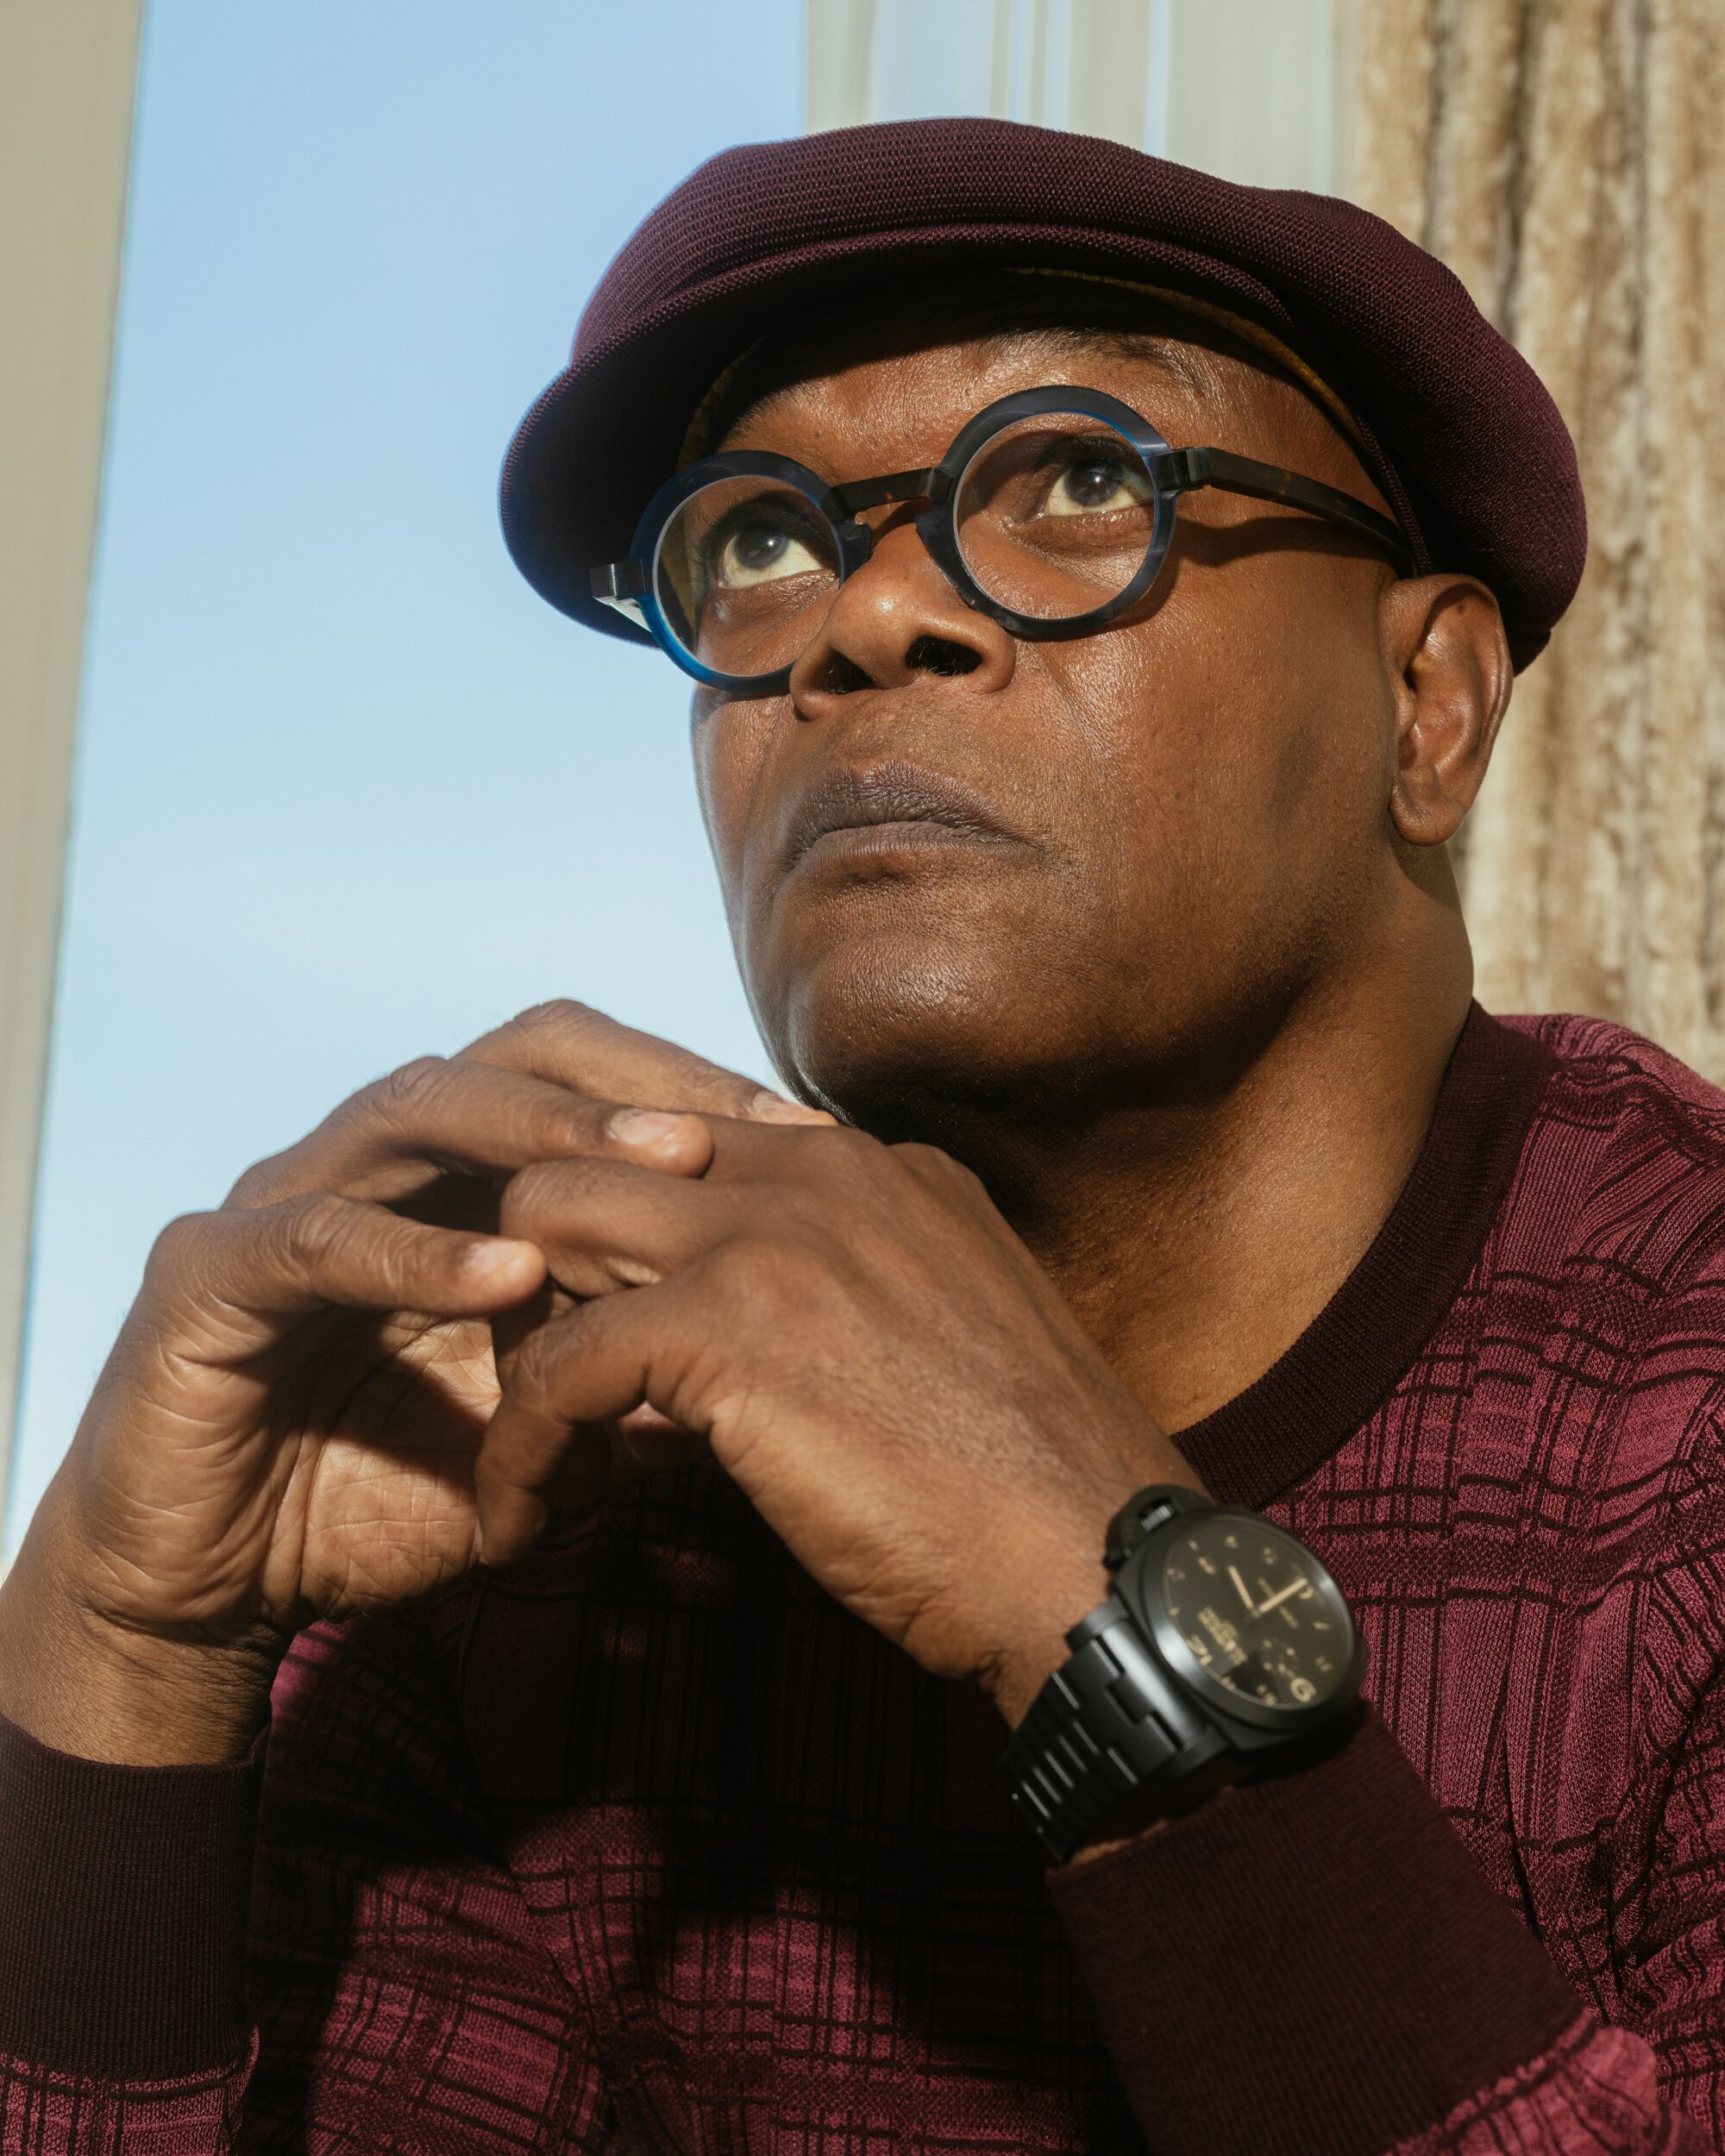 Samuel L. Jackson in a burgundy sweater and a burgundy hat.